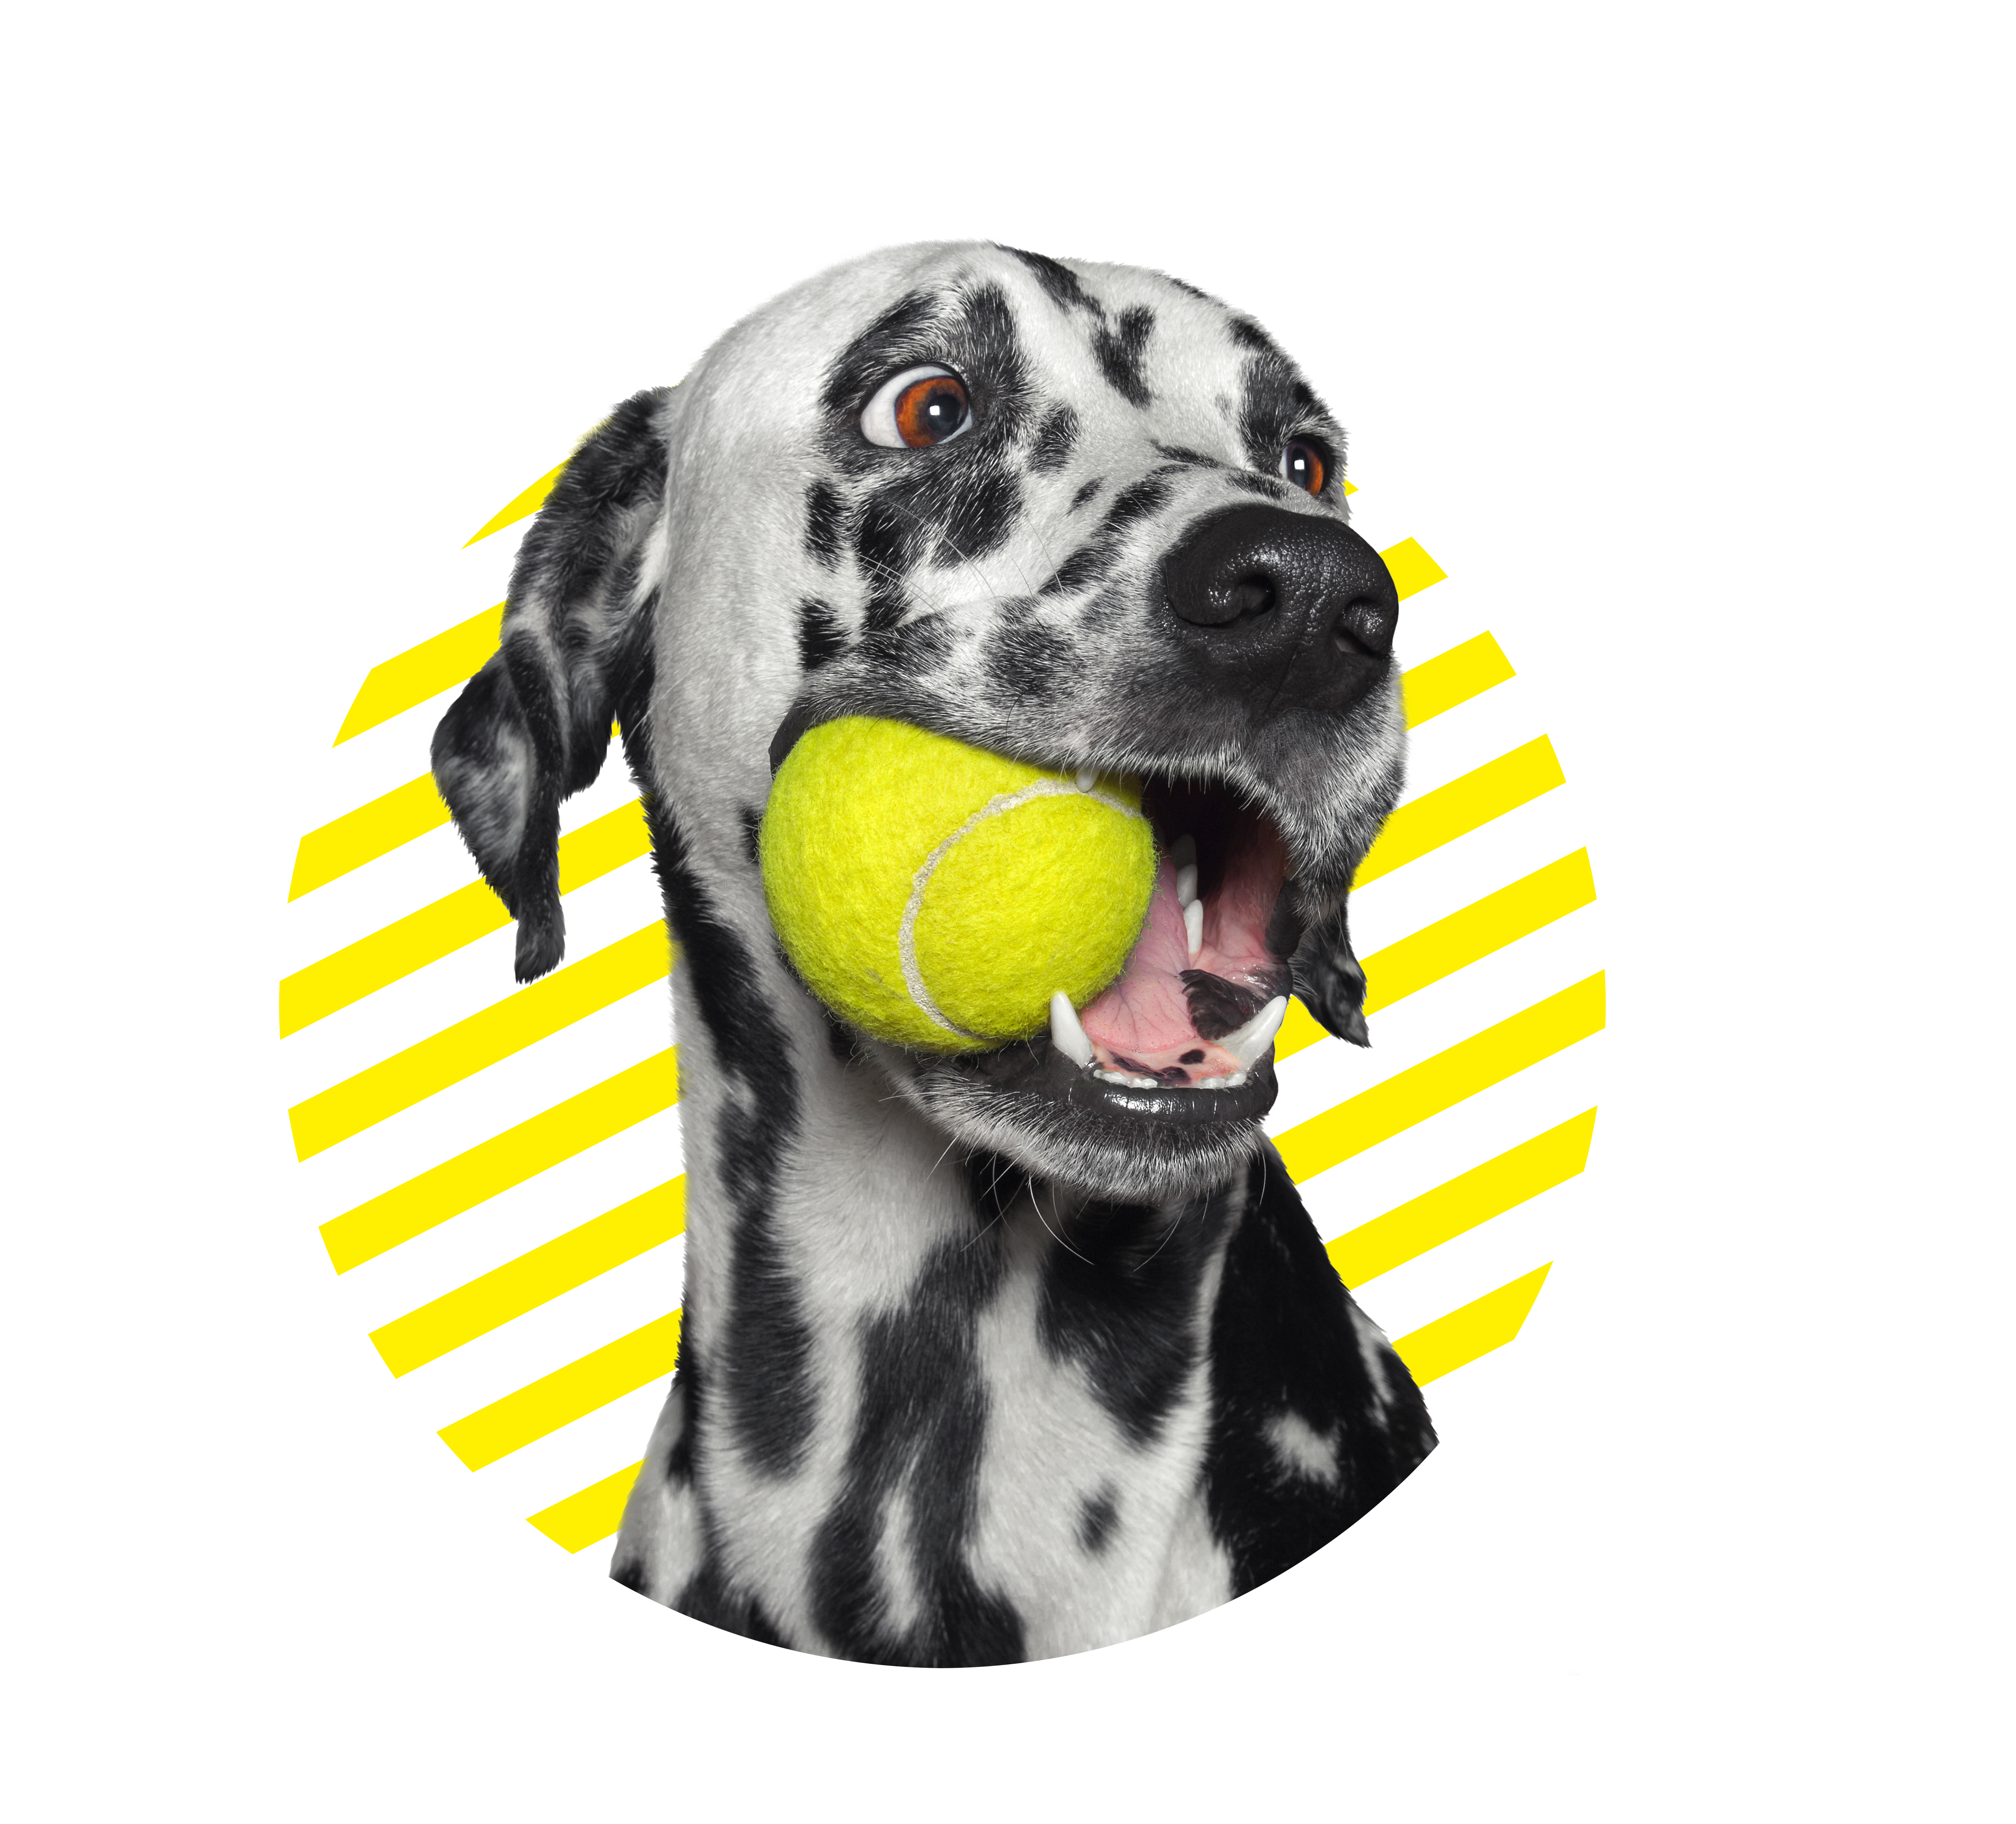 https://www.globalpetexpo.org/images/expolibraries/siteimages/expo-2024/dog_ball_circle_blend.png?sfvrsn=5b0d01ef_1